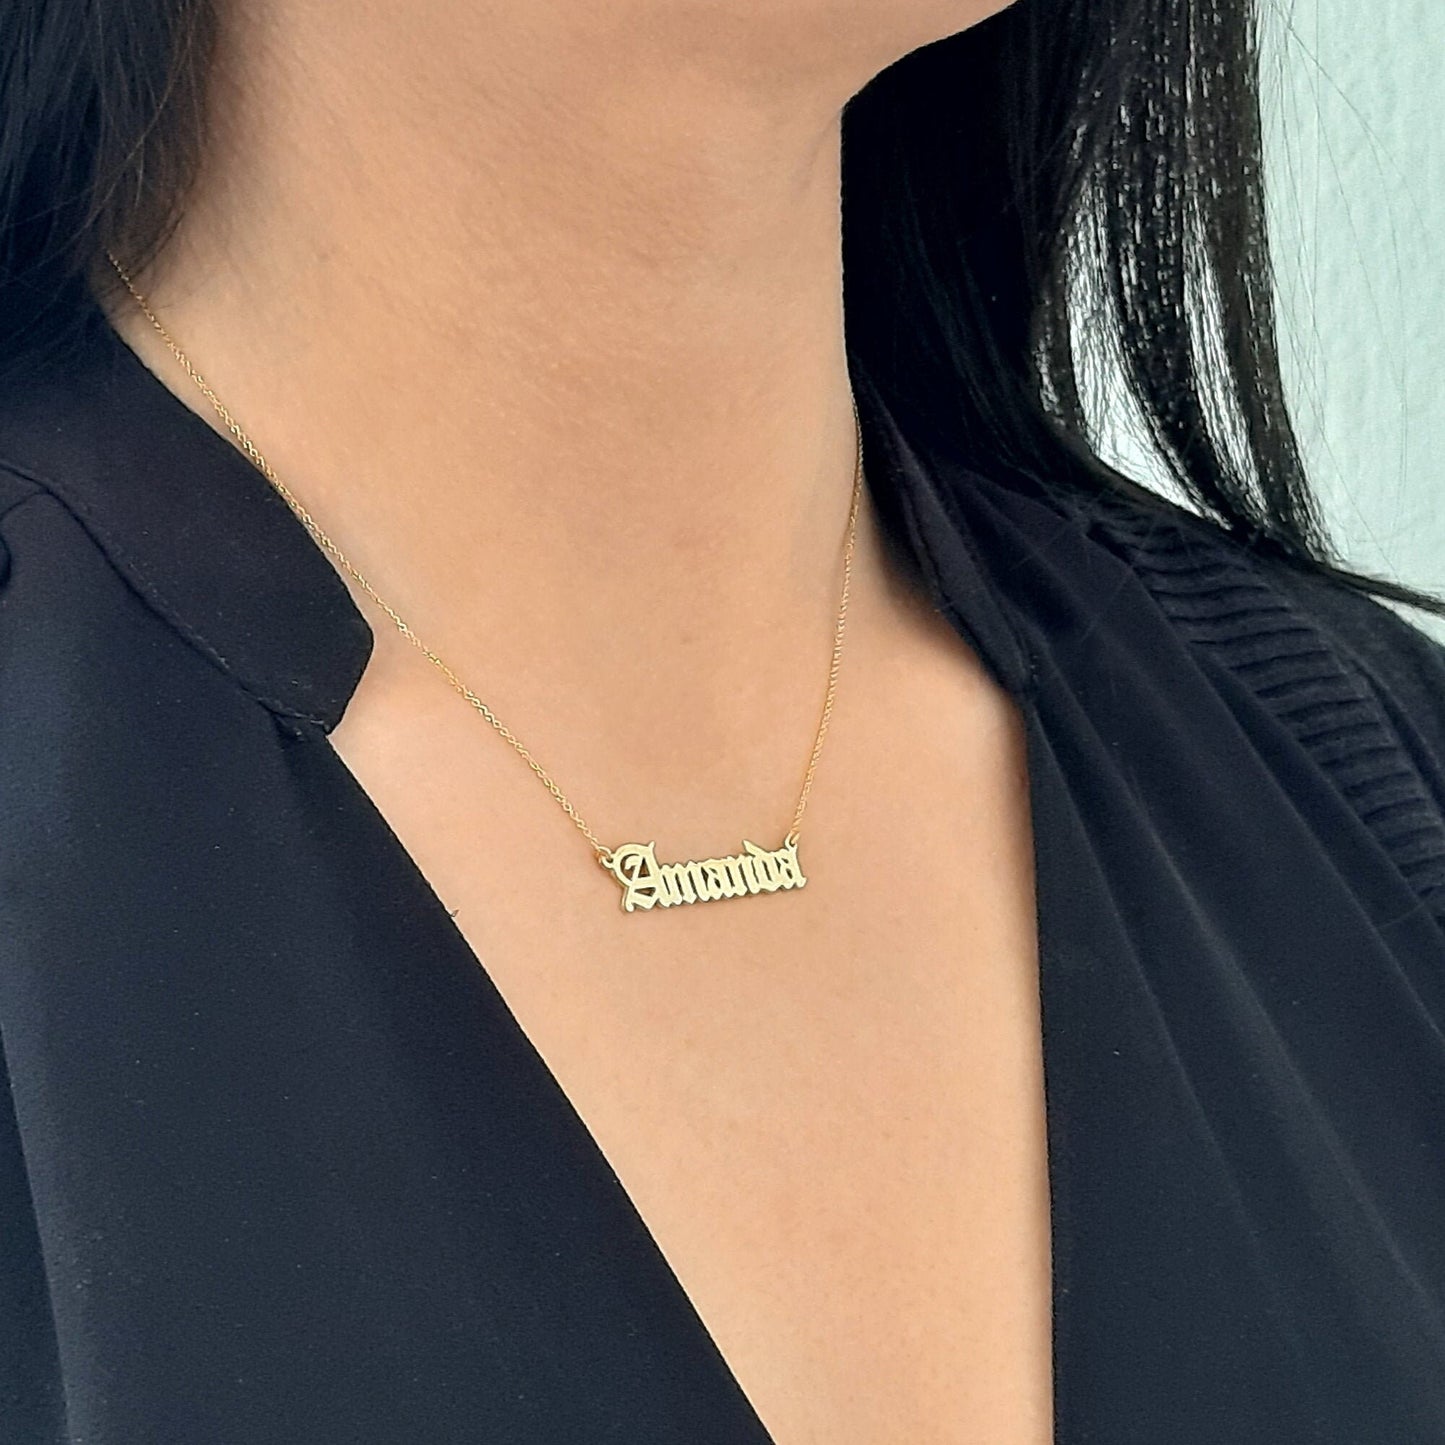 Old English Name Necklace - Chain Name Necklace - Gold Name Necklace - Personalized Necklace - Custom Name Necklace - necklace Gift for her